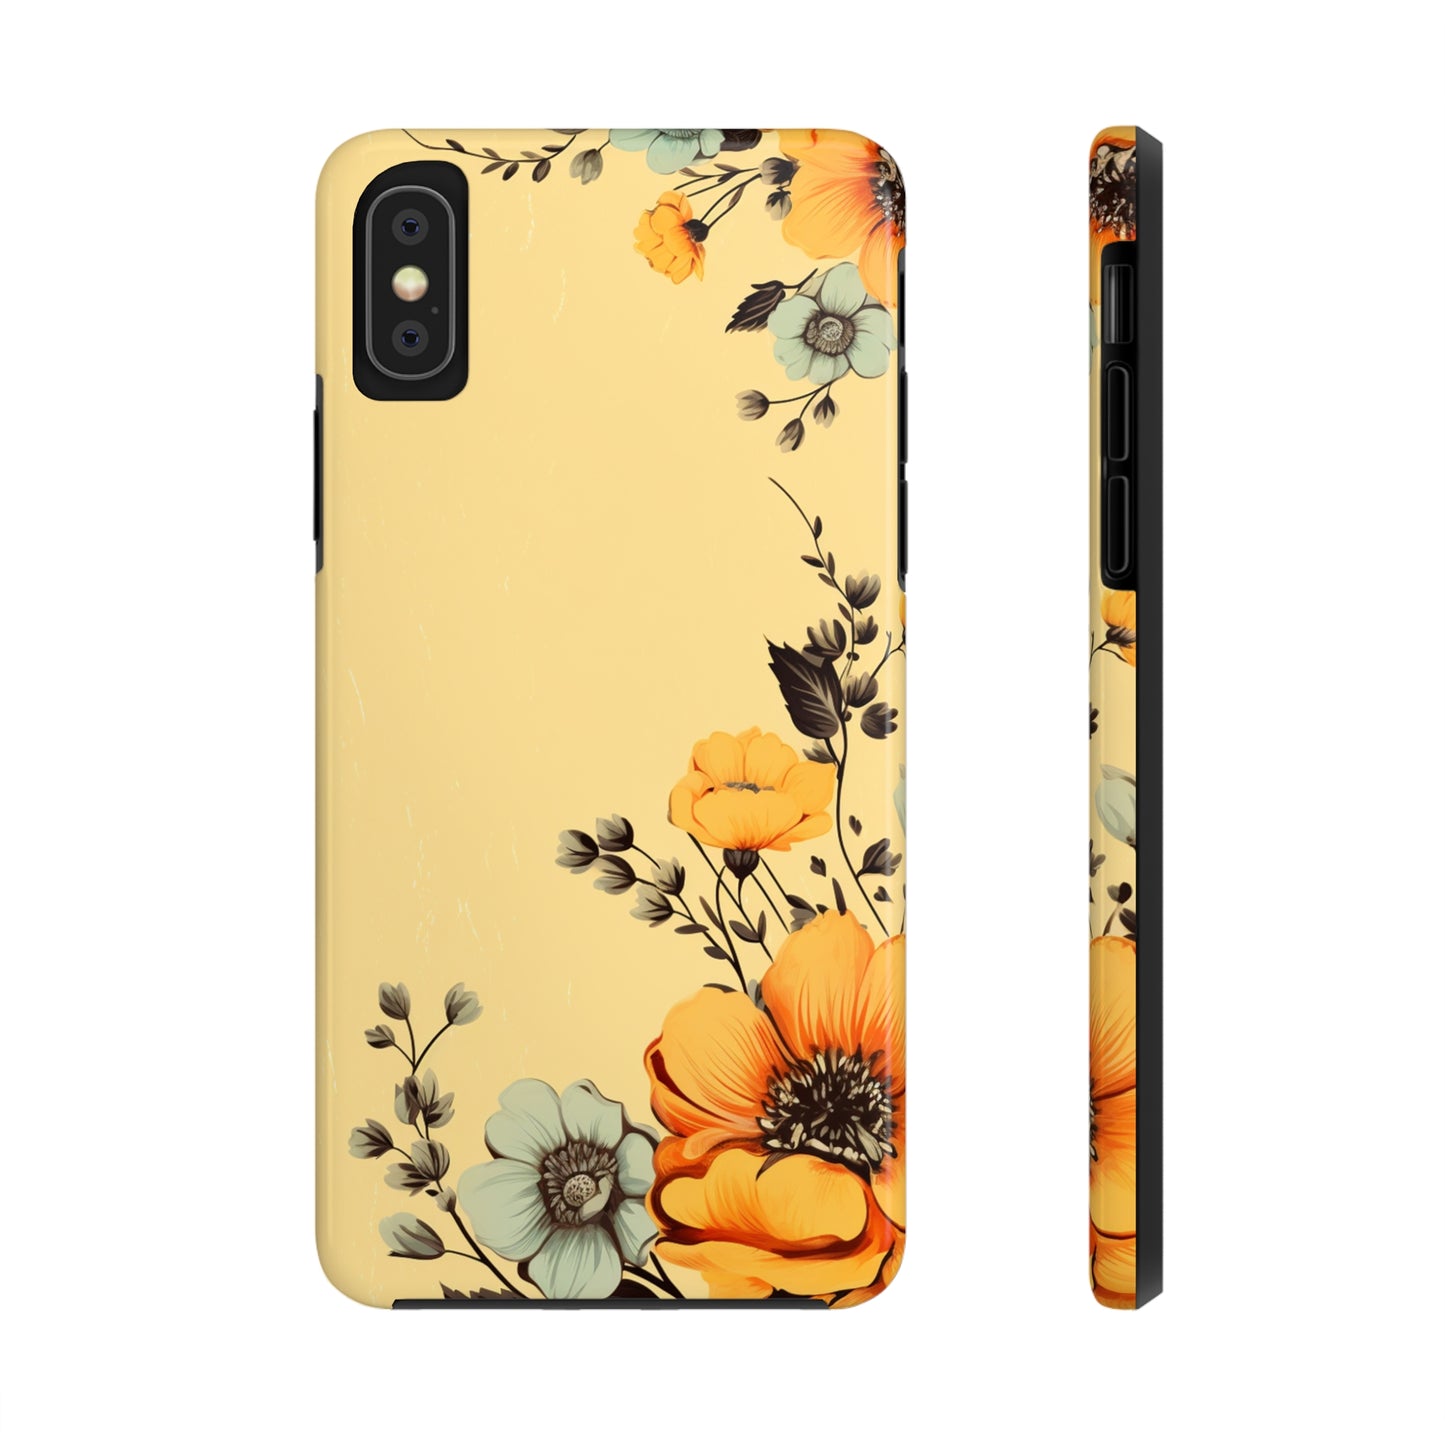 iPhone case with classic vintage floral design